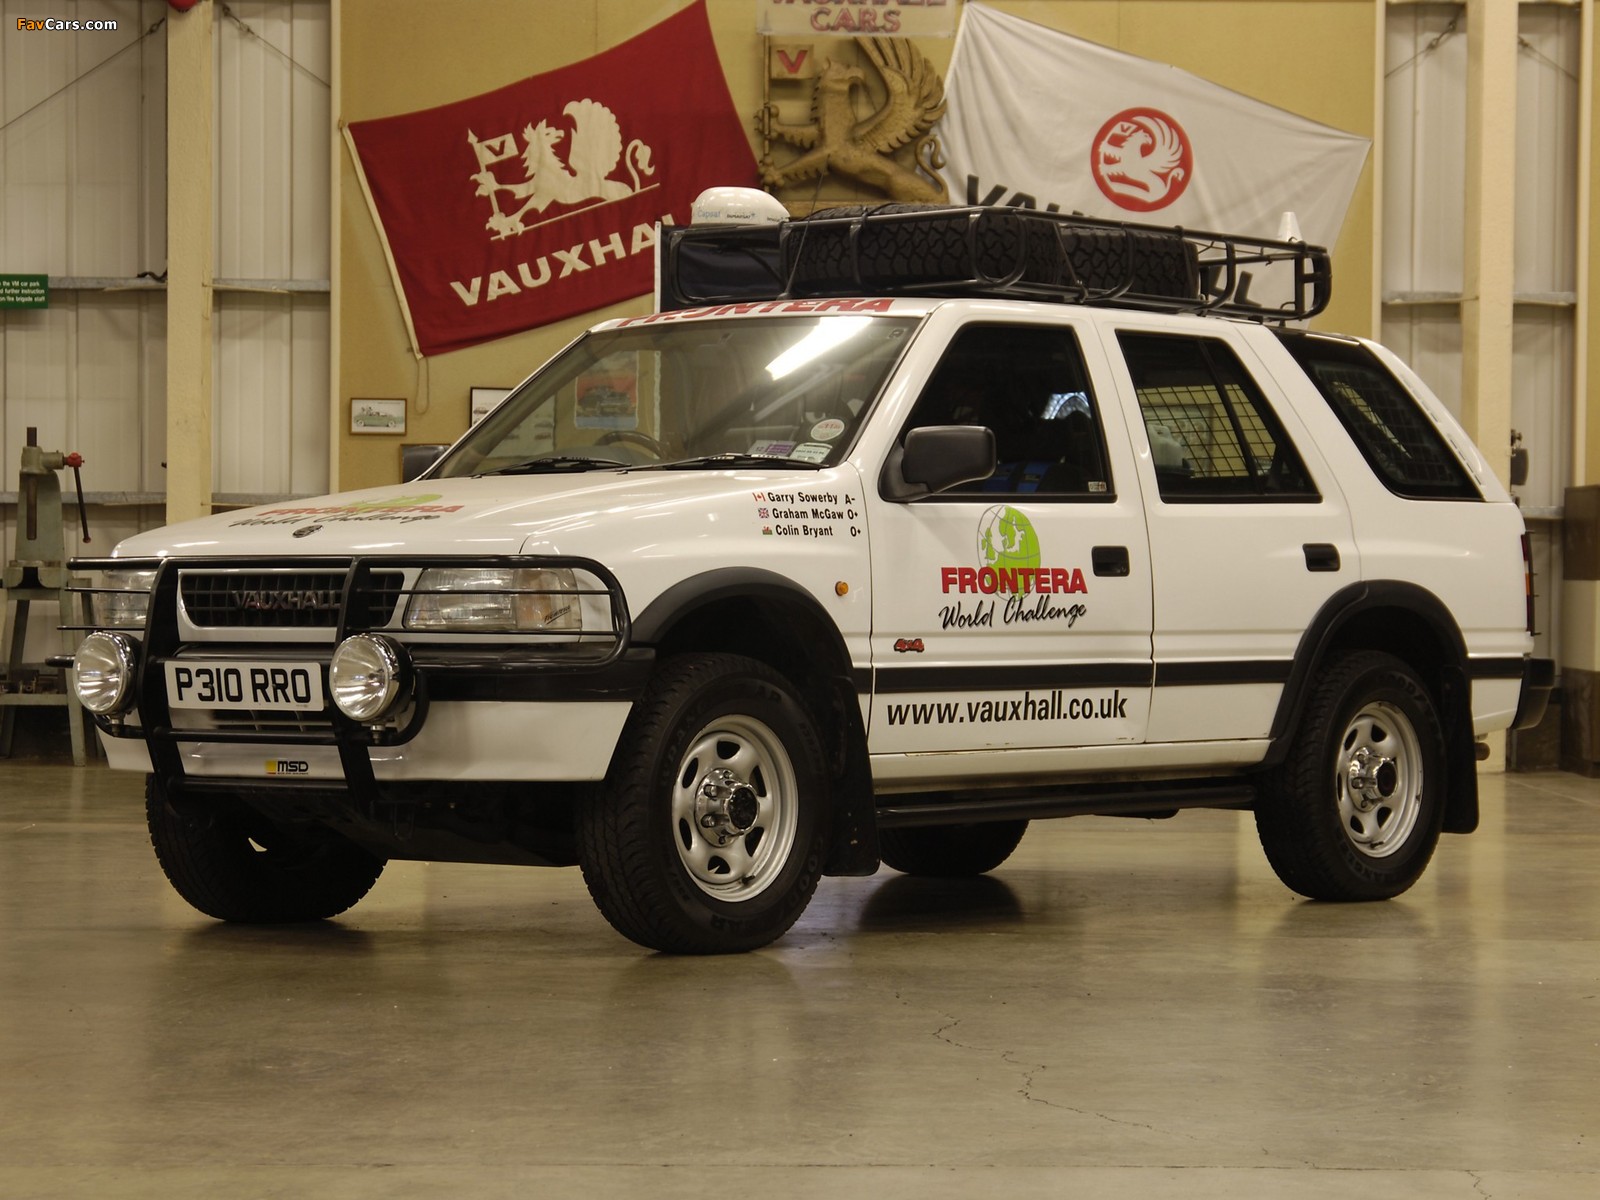 Vauxhall Frontera TDS Frontera World Challenge (A) 1997 pictures (1600 x 1200)